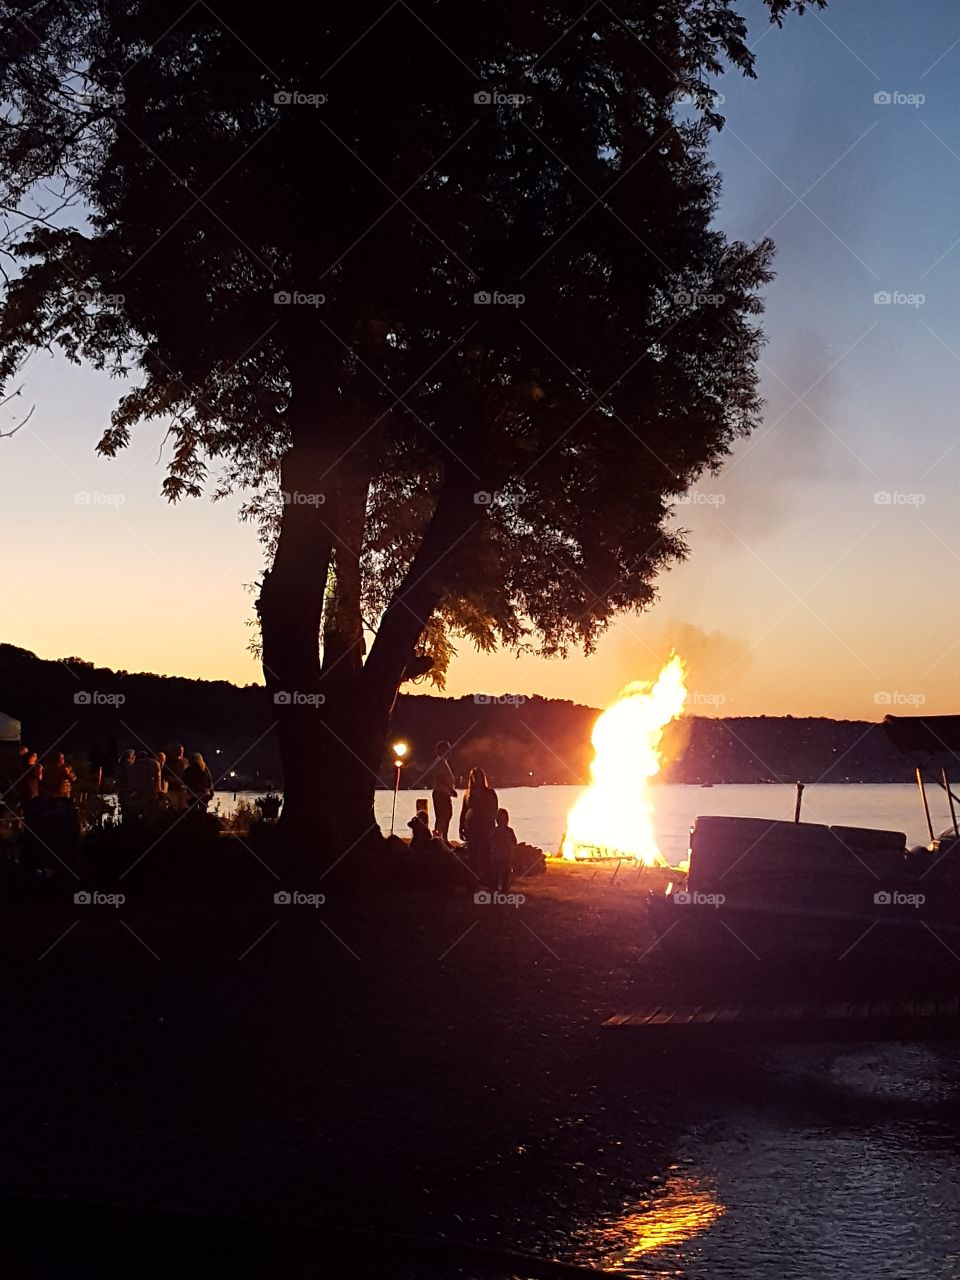 BonFire Conesus Lake New York July 3rd. Annual Ring of Fire.